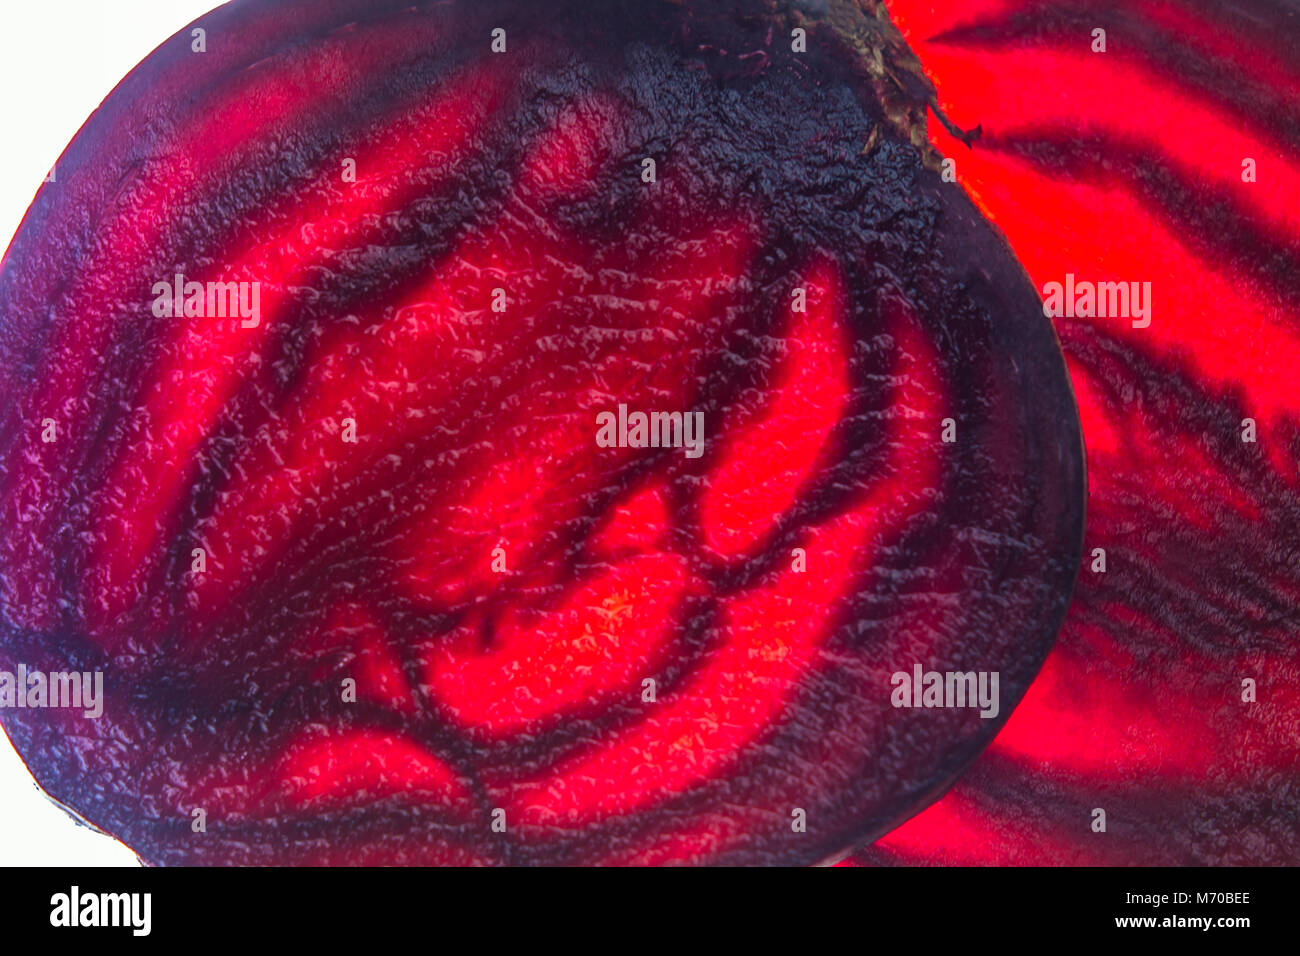 fresh red beet slices translucent food macro on lighted background Stock Photo